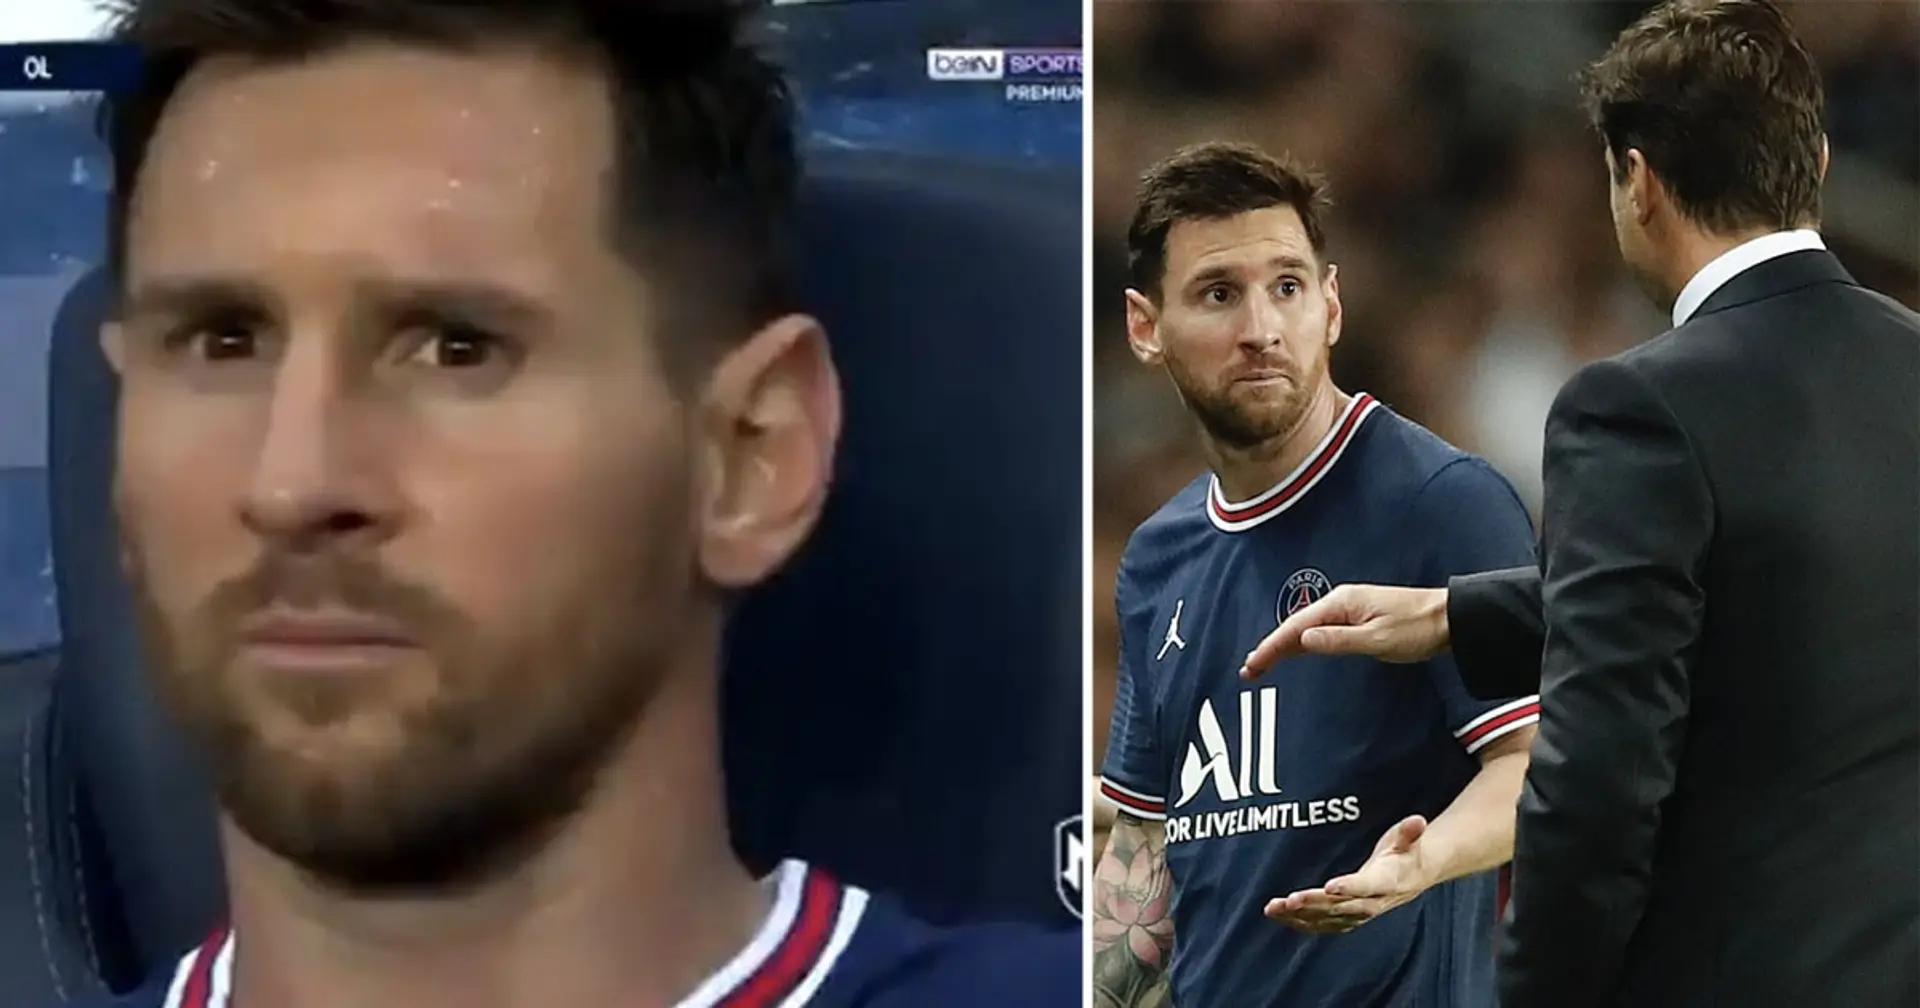 Messi refuses to shake Pochettino's hand after substitution - reaction spotted